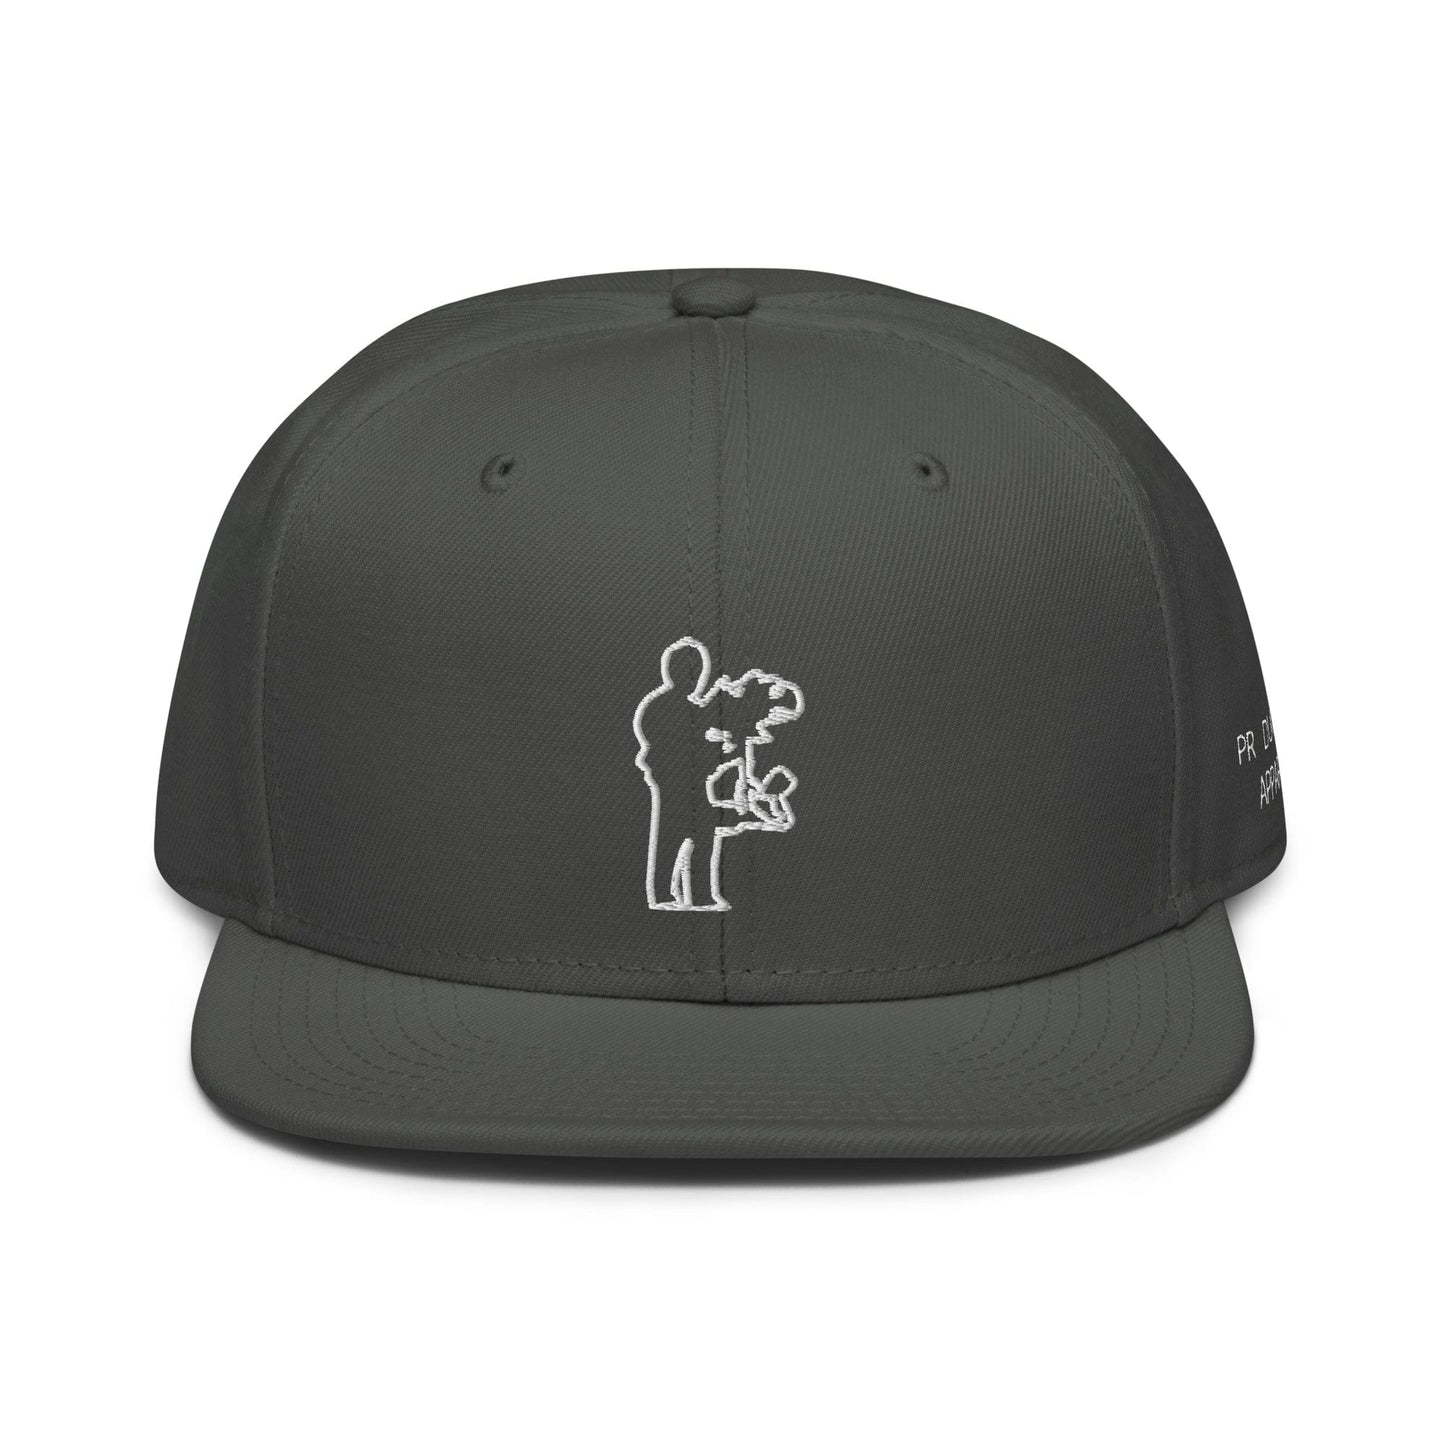 Production Apparel SteadiMan Hat Charcoal gray